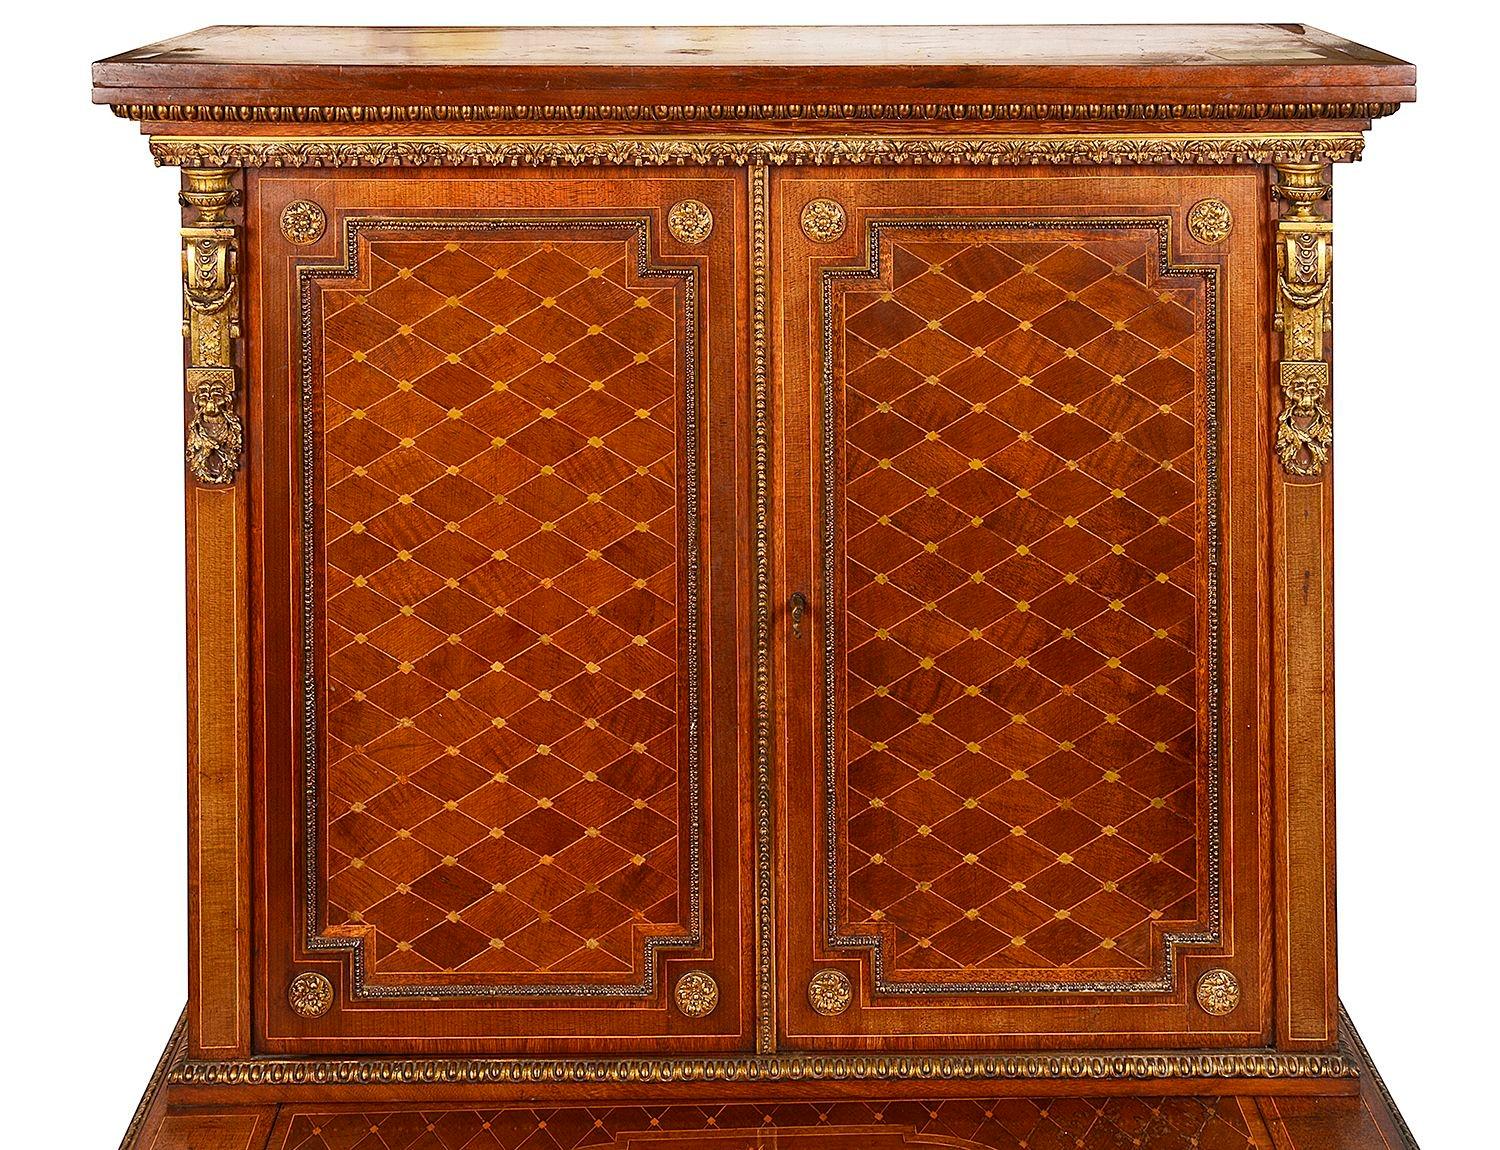 A very good quality late 19th Century French Bon hour du jour. The pair of doors above having wonderful parquetry inlaid diamond shaped inlay, a sliding tablet  opening to write upon. The single frieze drawer having a central classical gilded ormolu